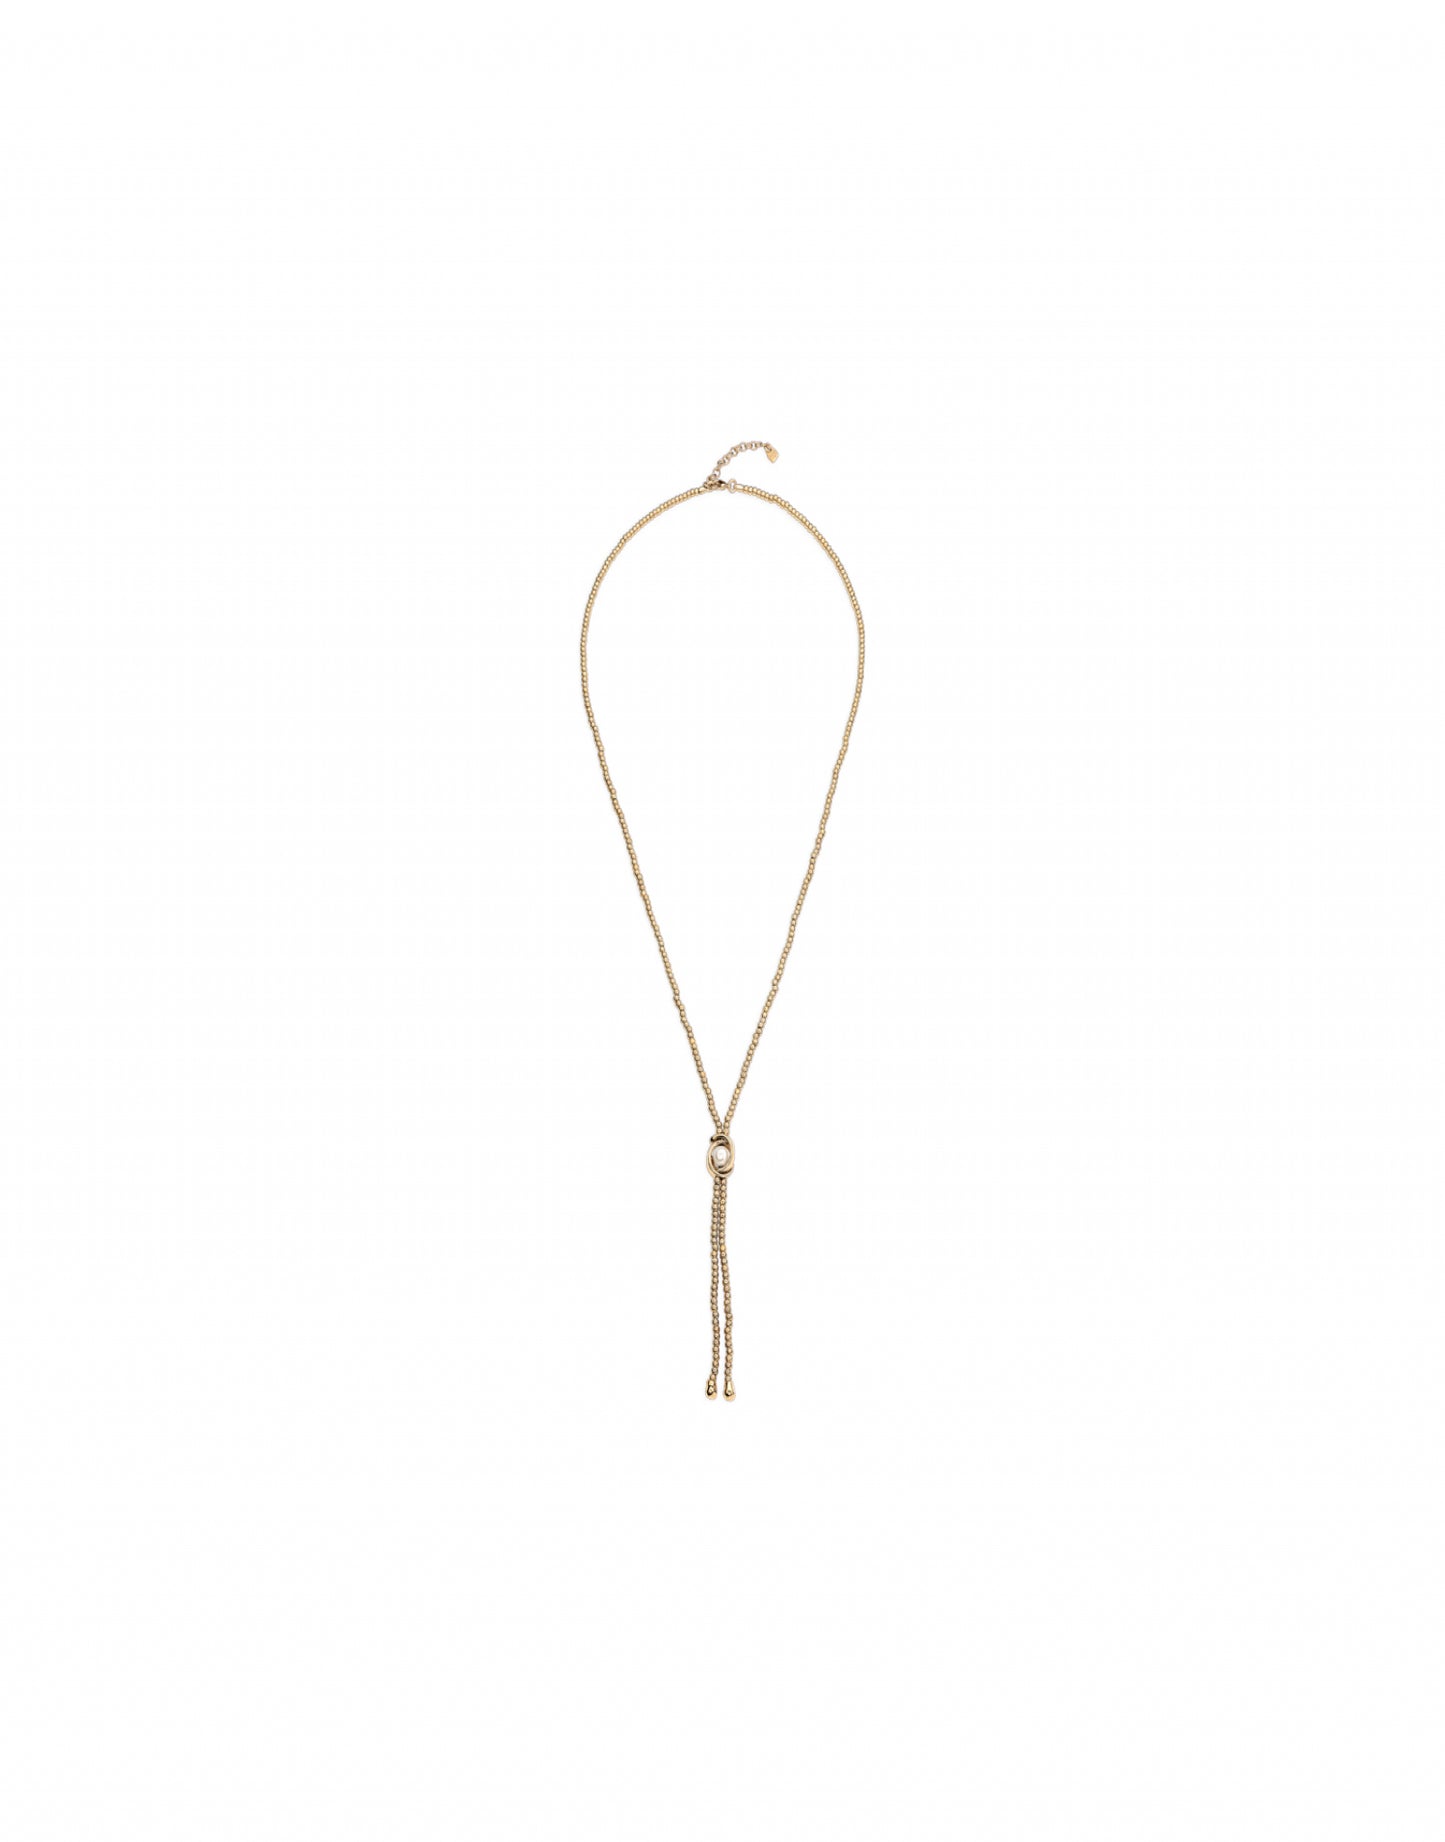 UNO DE 50 UNOde50 - Gold Little Moon Necklace available at The Good Life Boutique